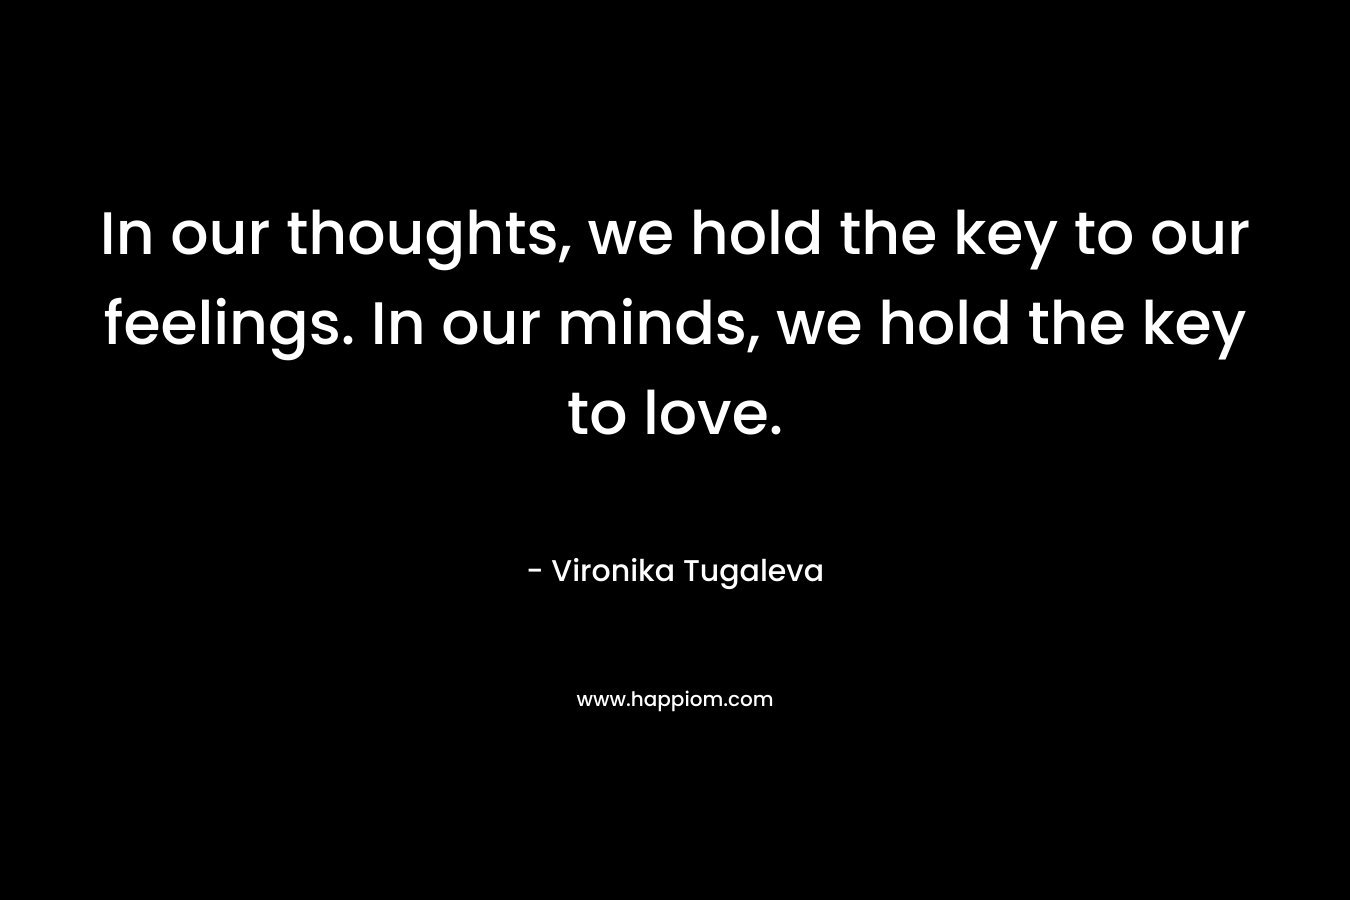 In our thoughts, we hold the key to our feelings. In our minds, we hold the key to love.